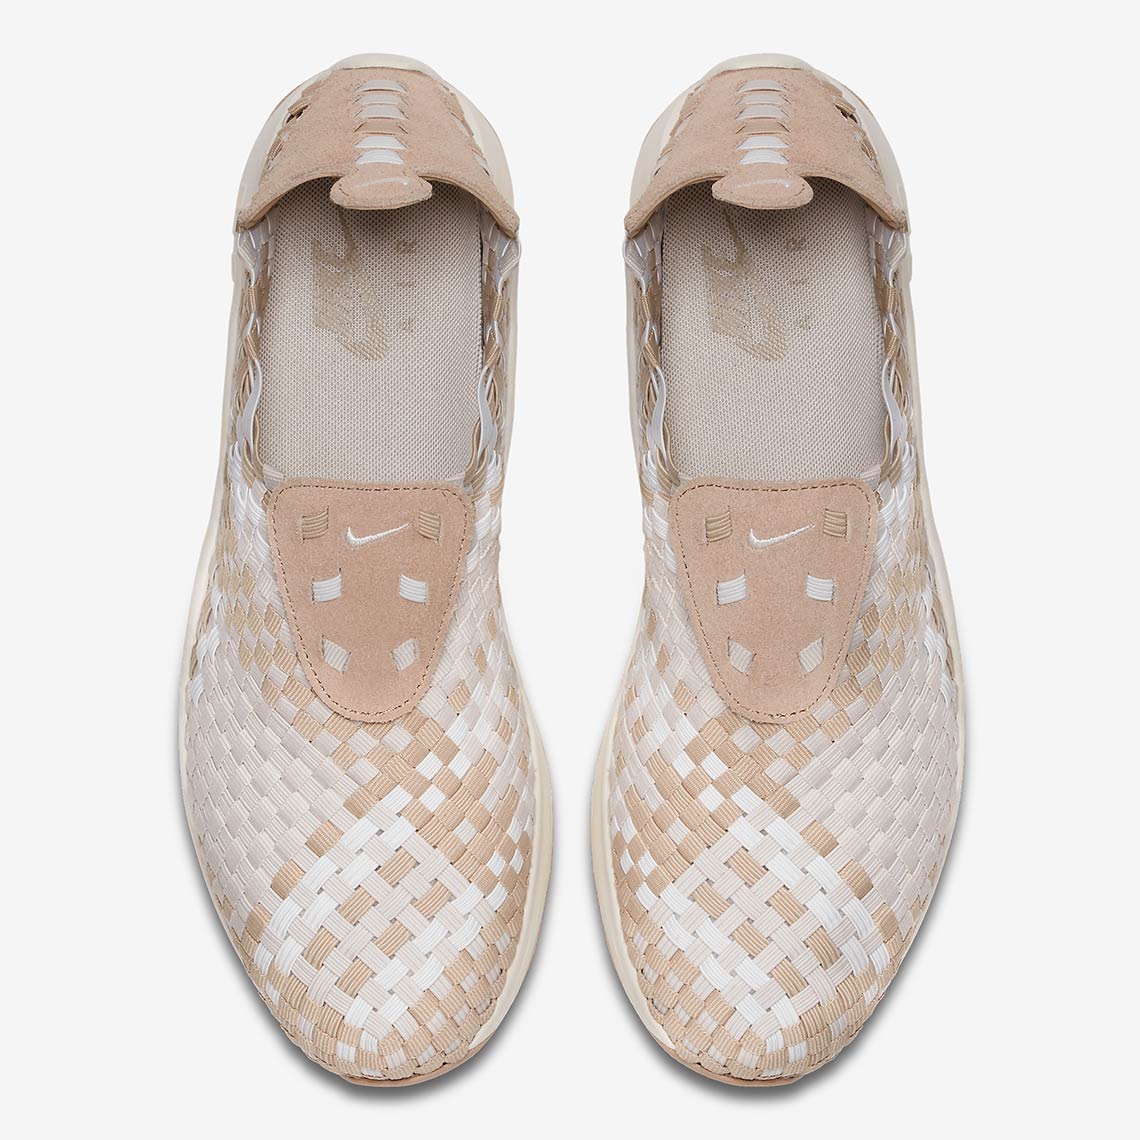 Nike Air Woven Tan 312422-201 Available Now | SneakerNews.com